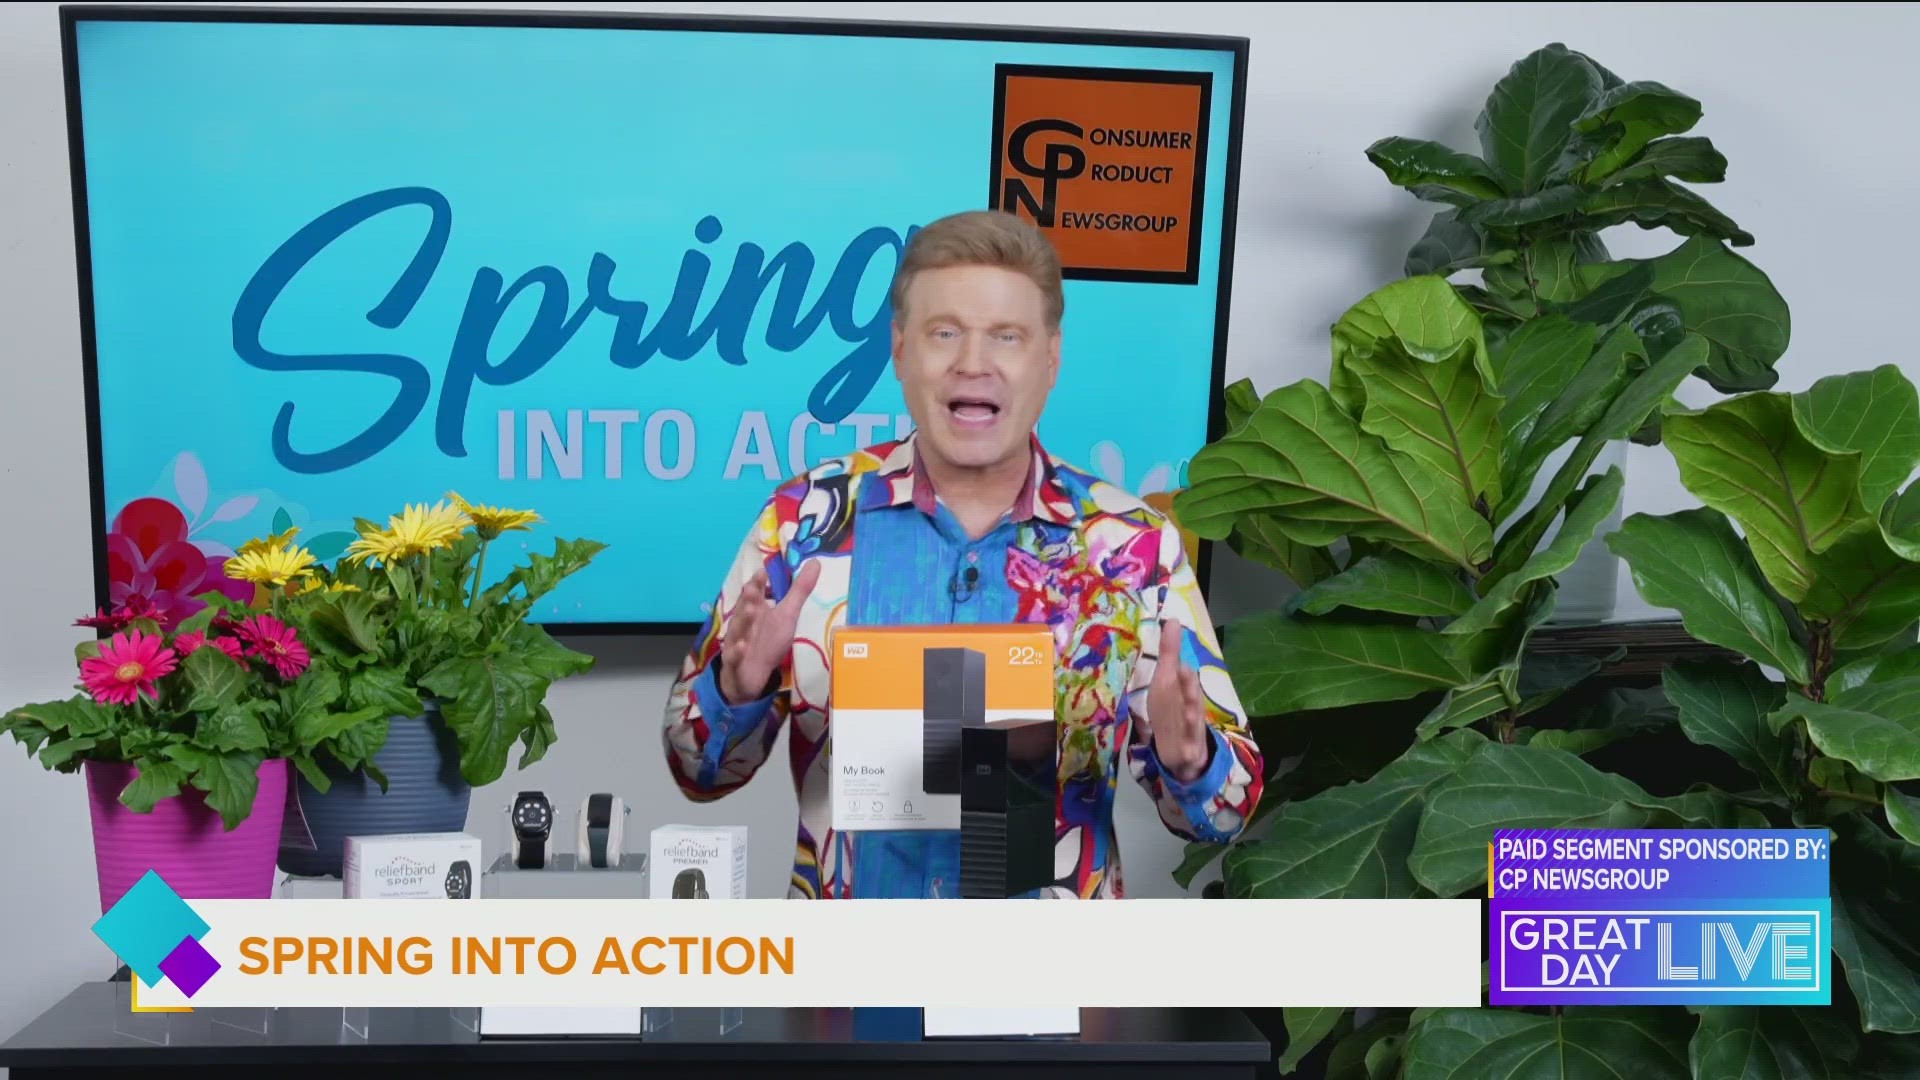 Spring into action to declutter your life with some helpful products